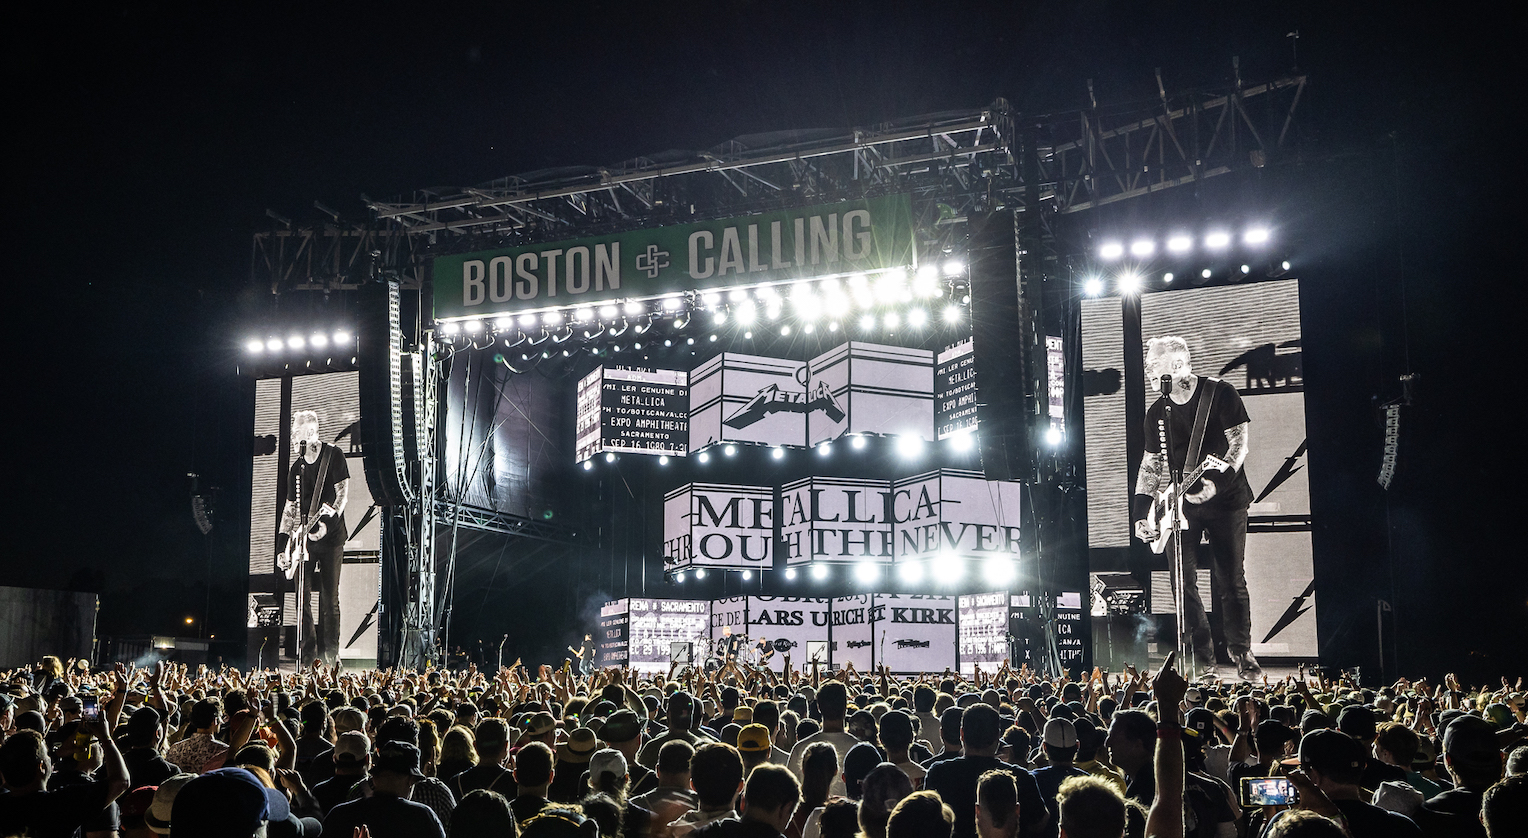 Boston Calling Day 3: Metallica Closes the Festival With Legendary Set